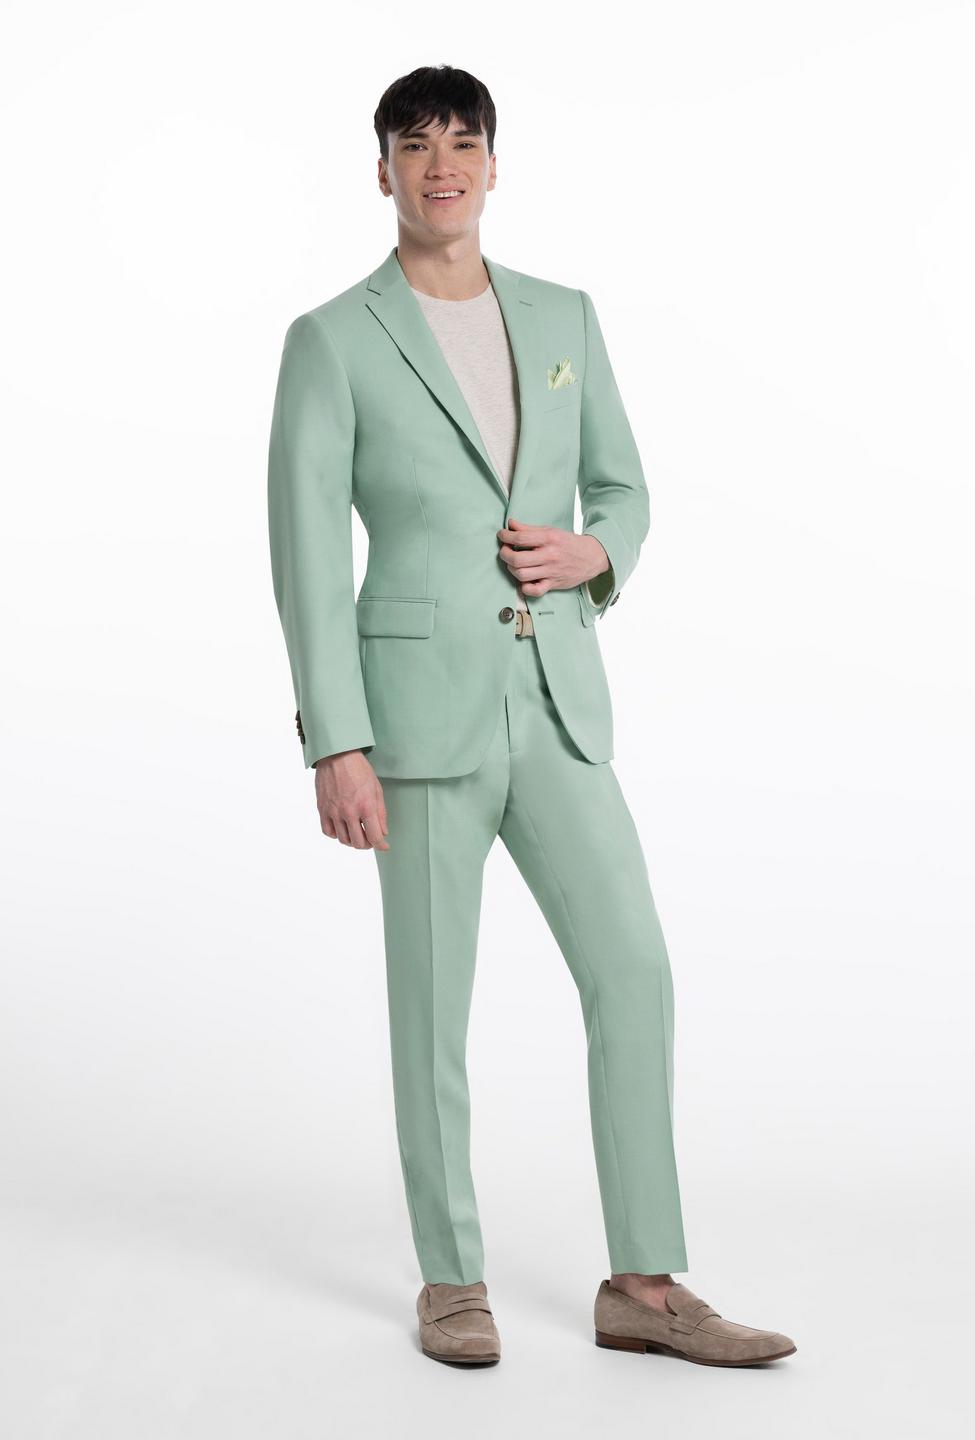 Green suit - Solid Design from Seasonal Indochino Collection